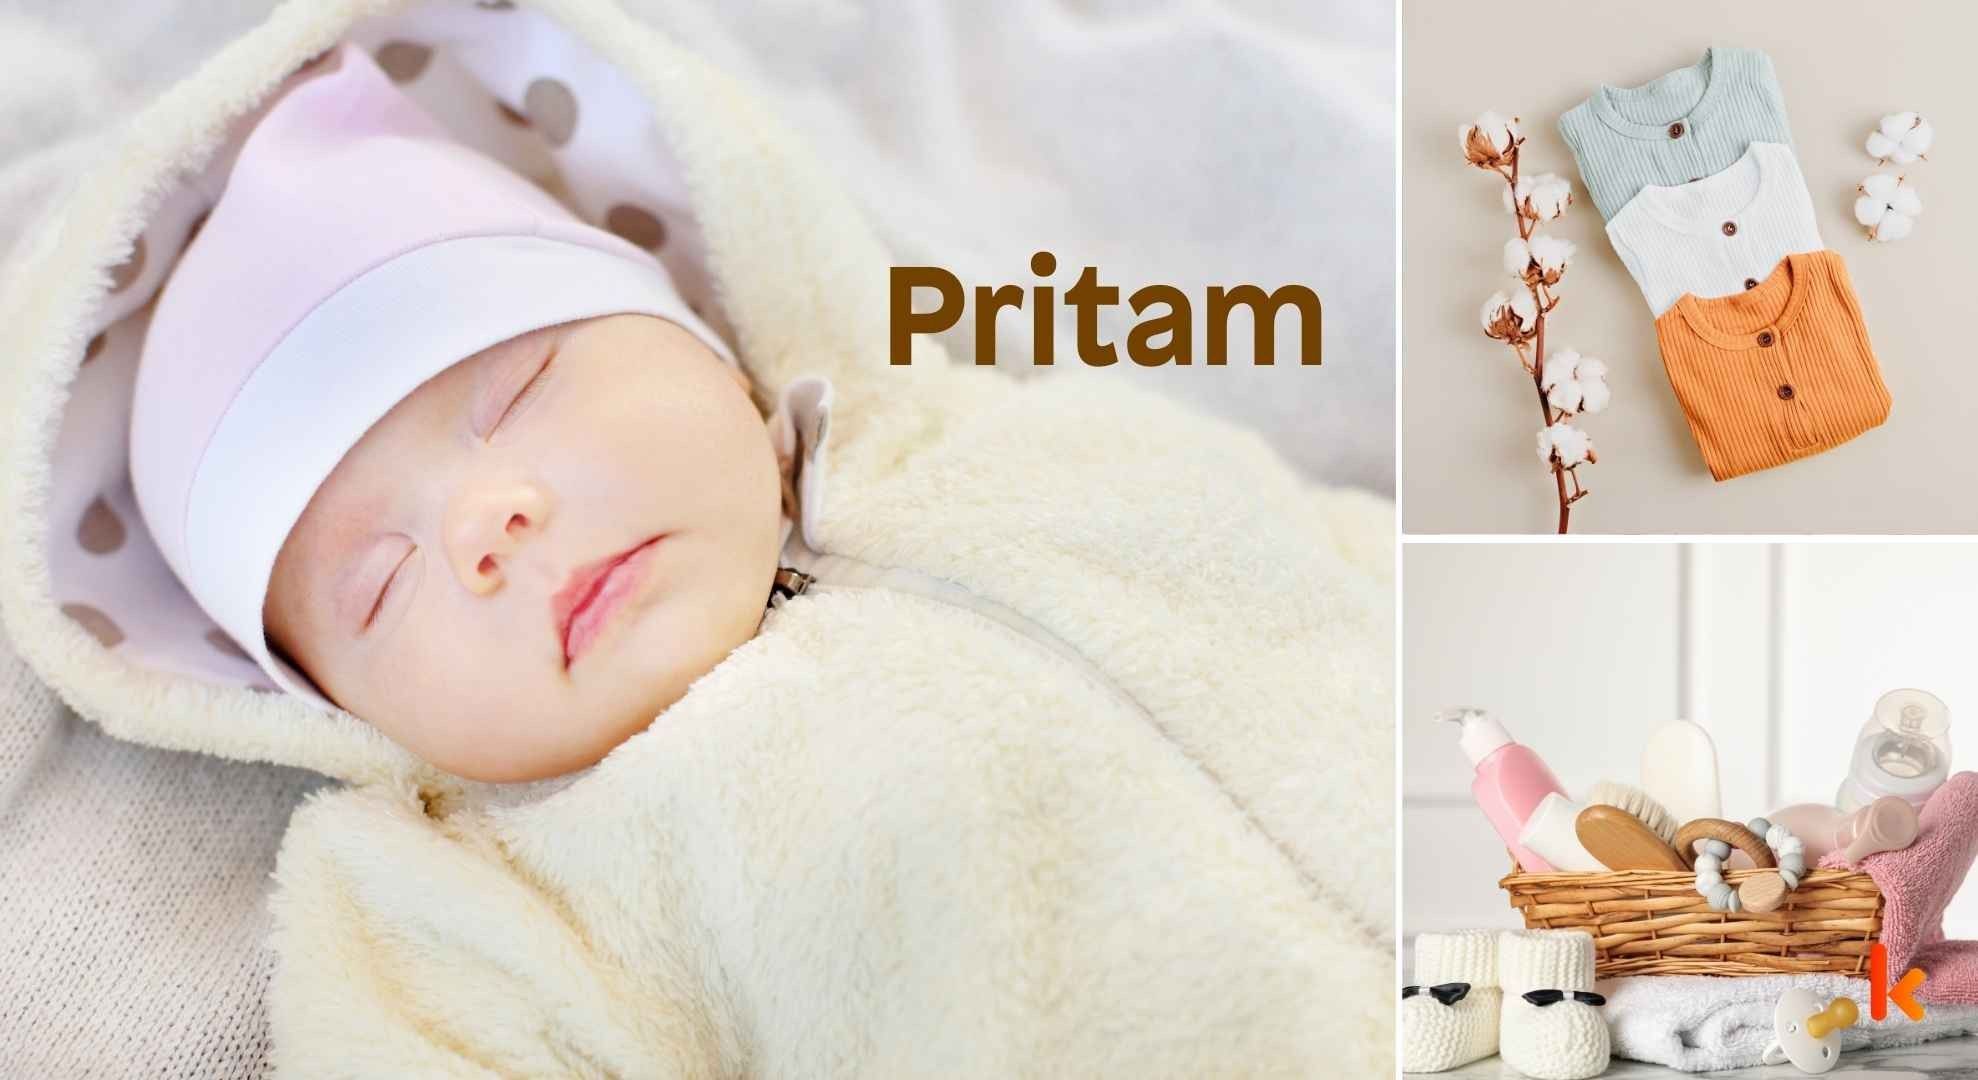 Meaning of the name Pritam